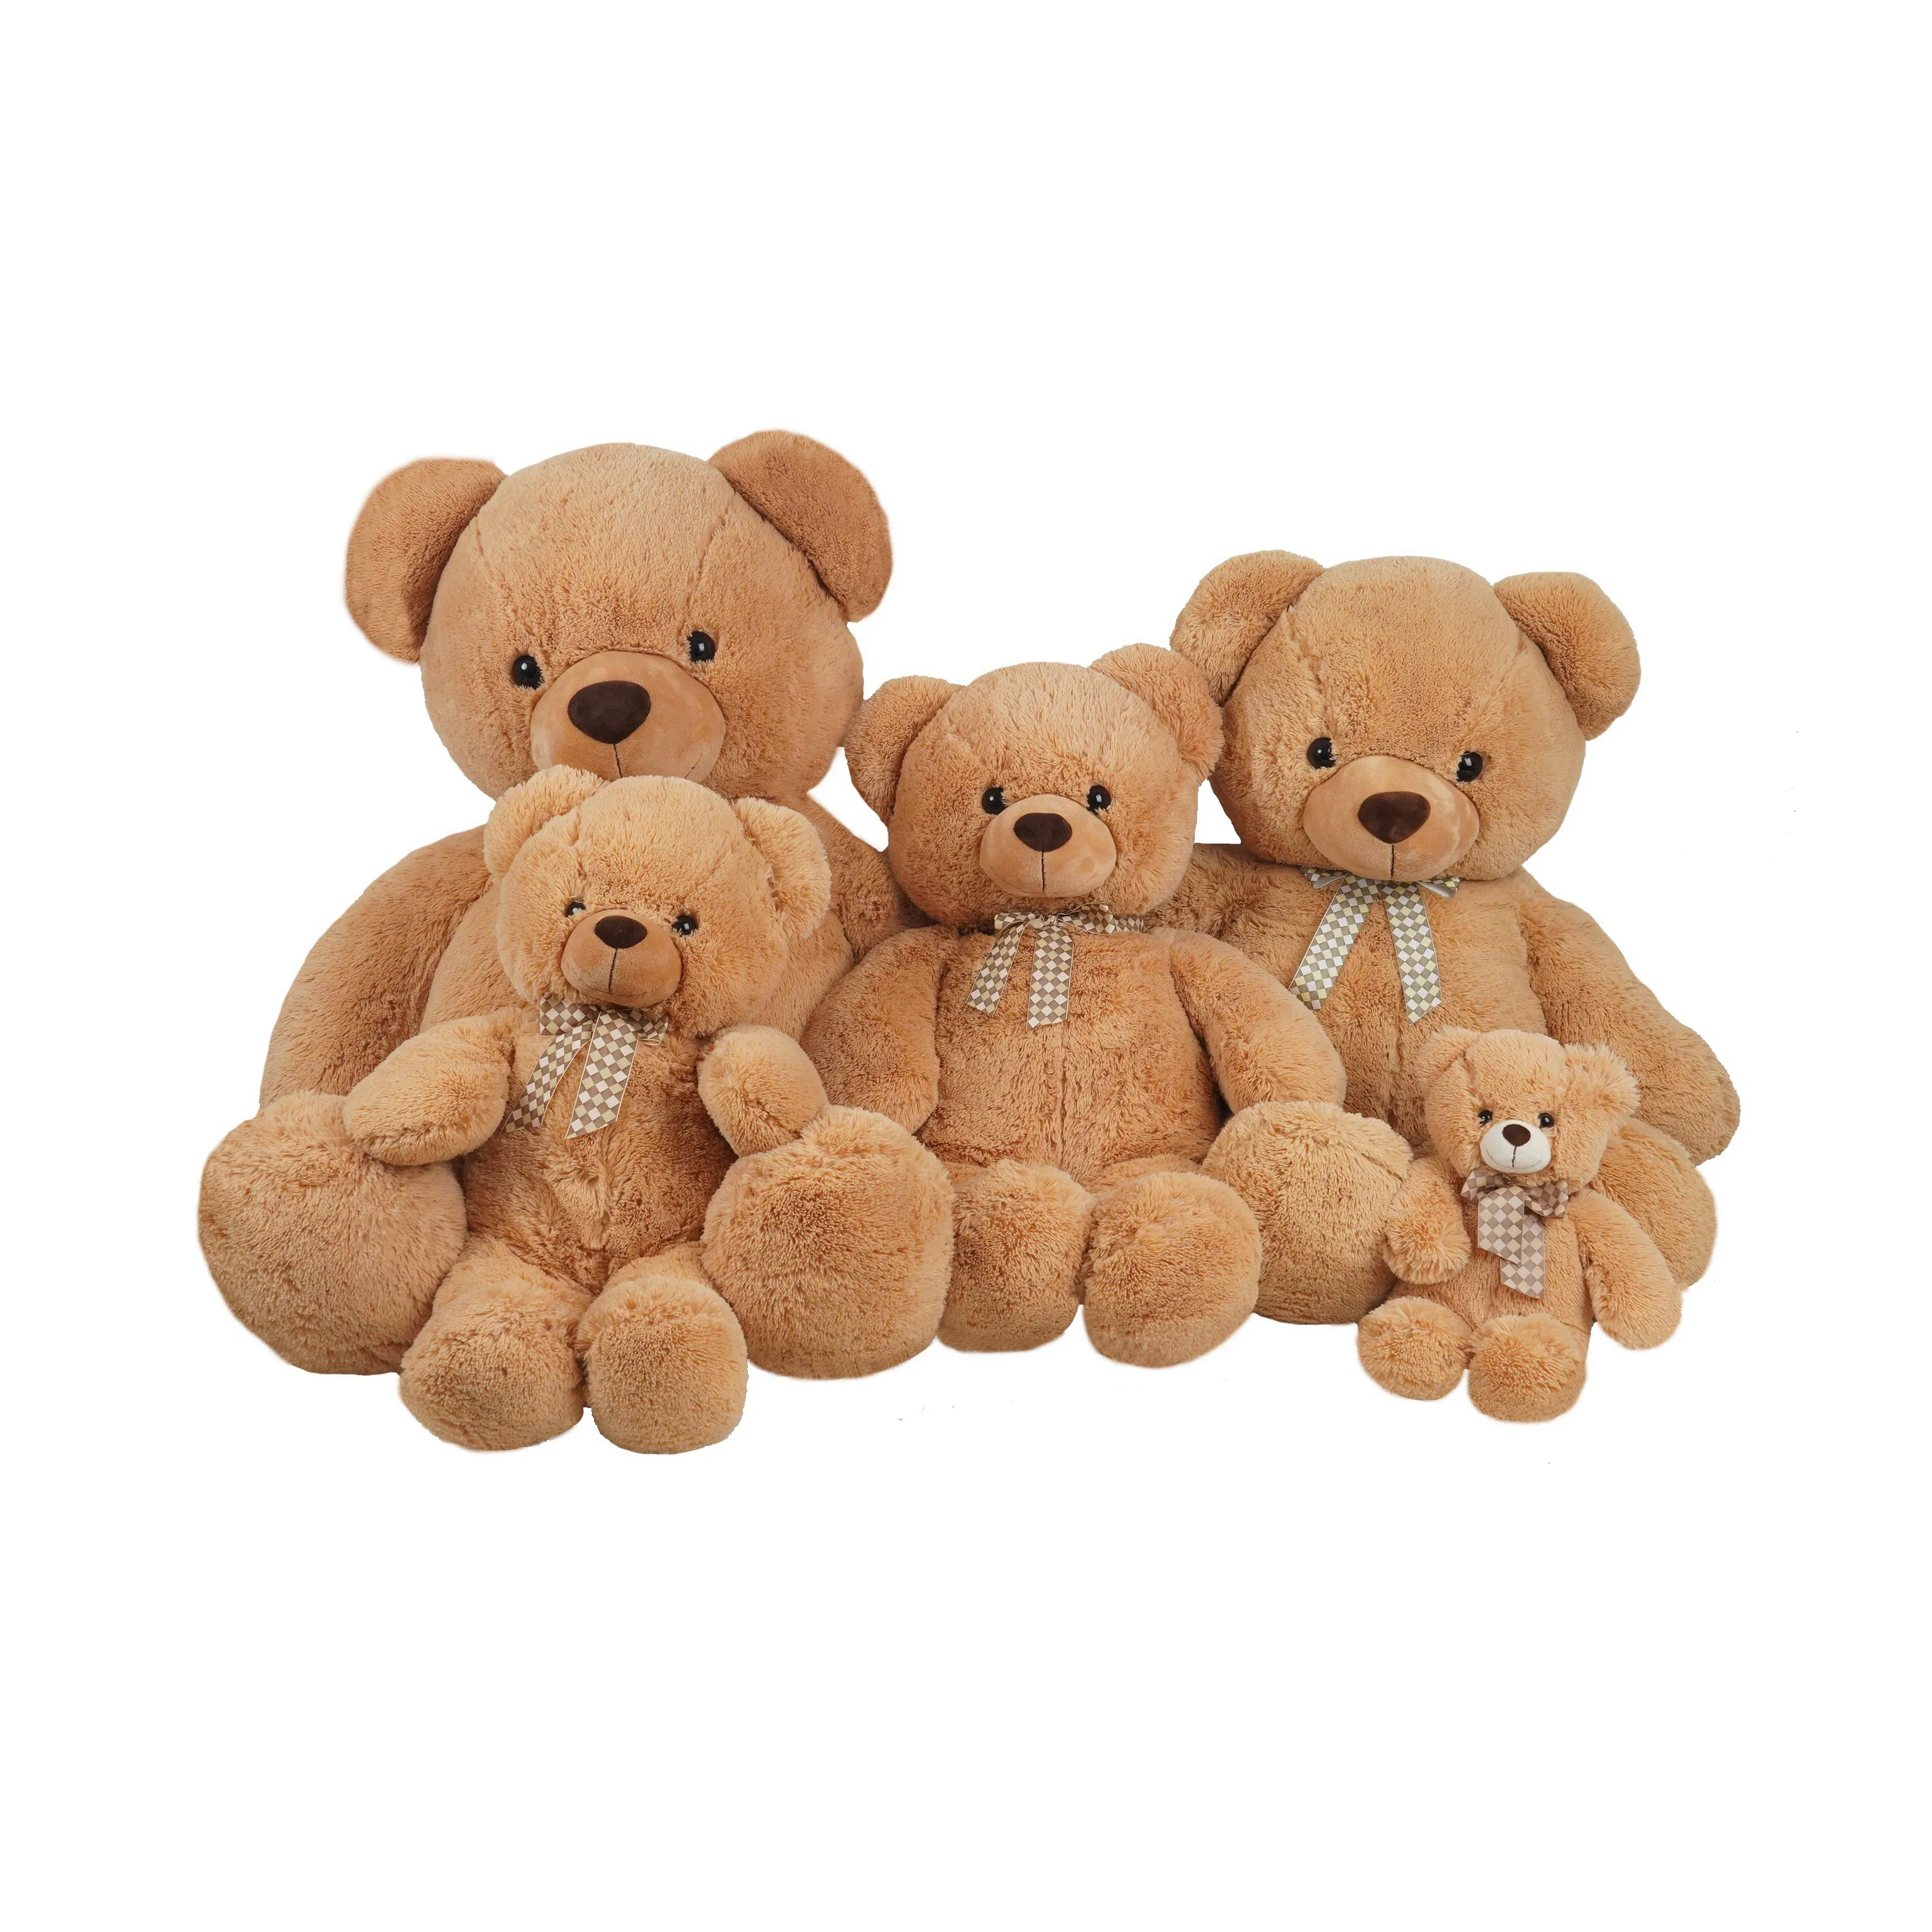 New arrivals high quality customized plush stuffed teddy bear toy for toys/gifts